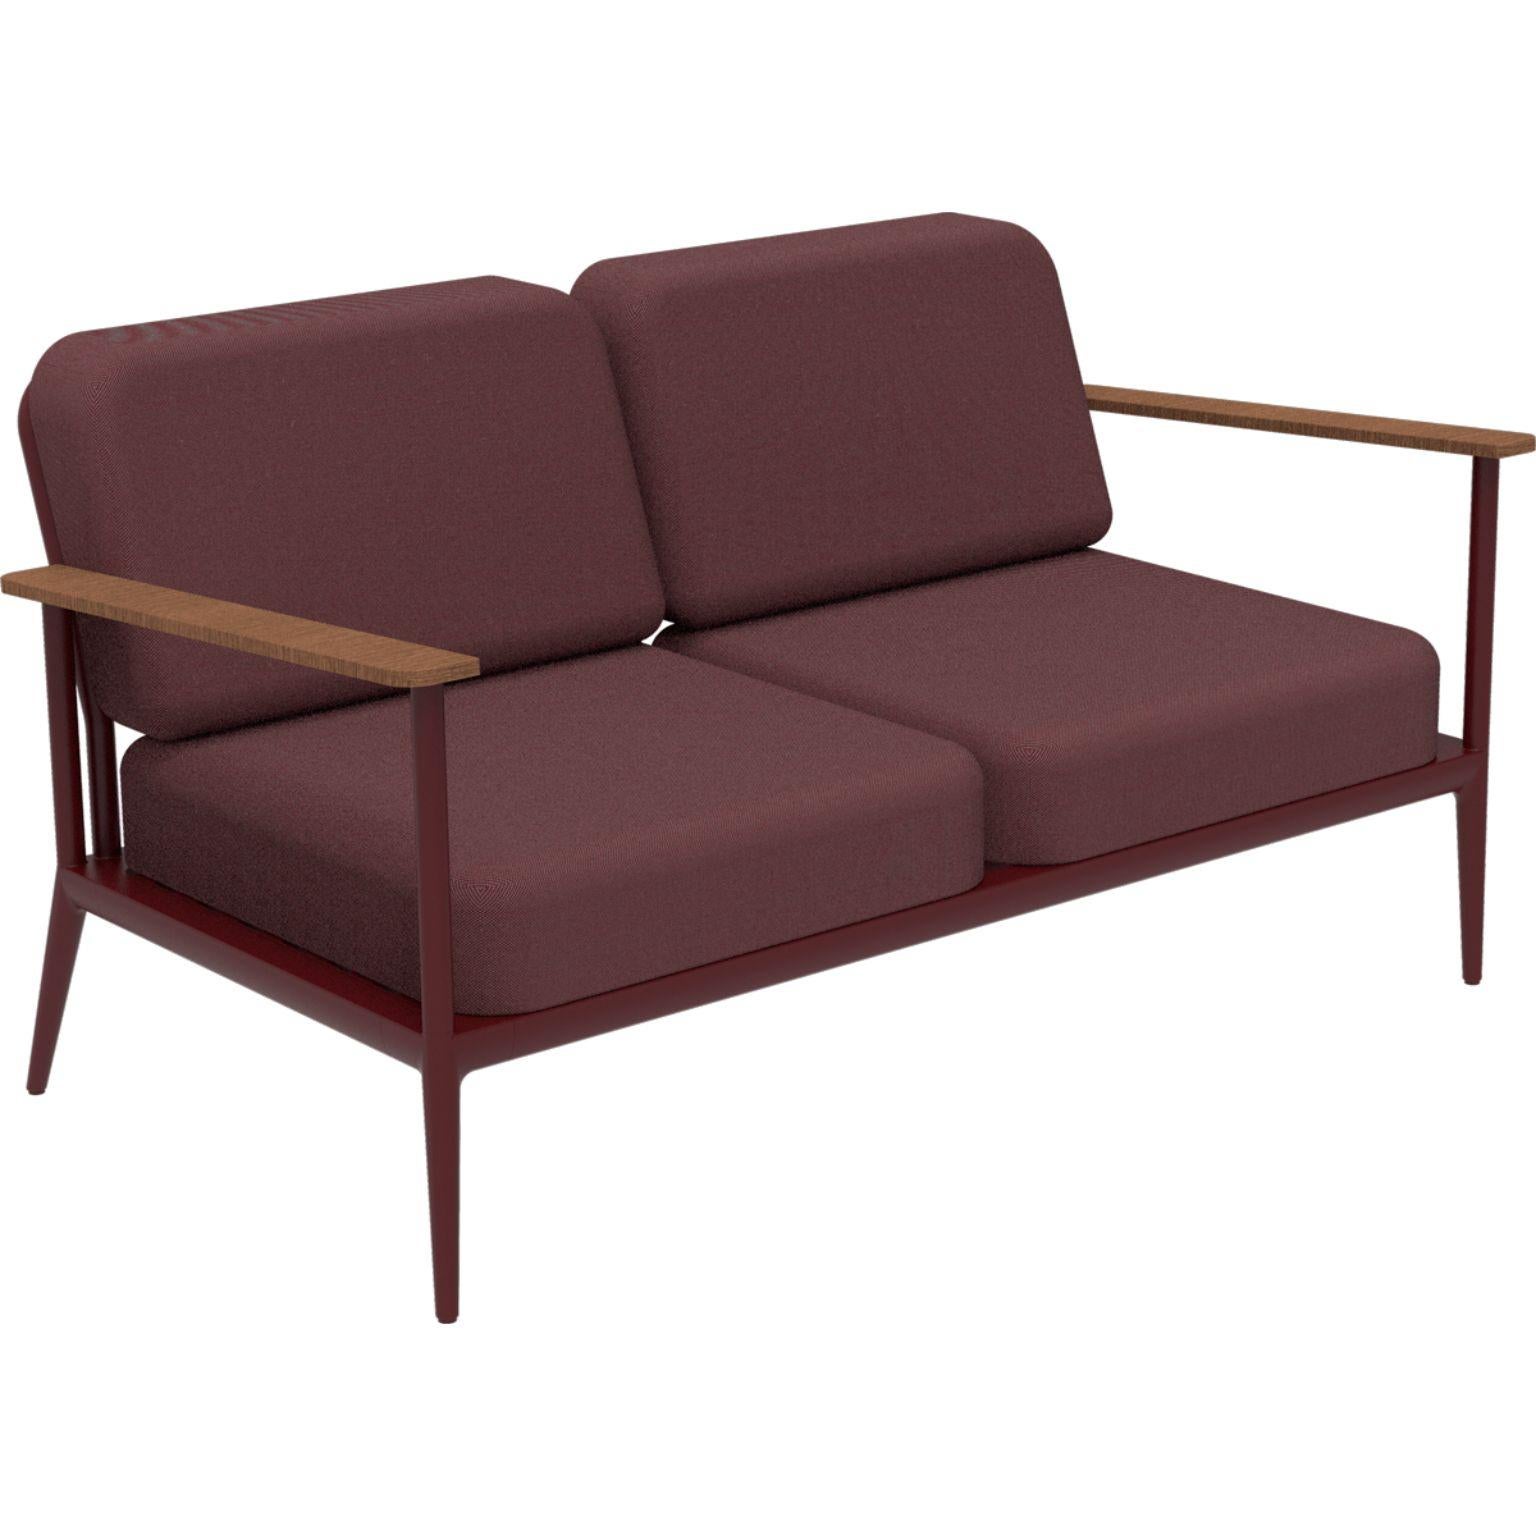 Nature burgundy sofa by MOWEE.
Dimensions: D85 x W151 x H81 cm (seat height 42 cm).
Material: aluminum, upholstery and Iroko wood.
Weight: 32 kg.
Also available in different colors and finishes.

An unmistakable collection for its beauty and